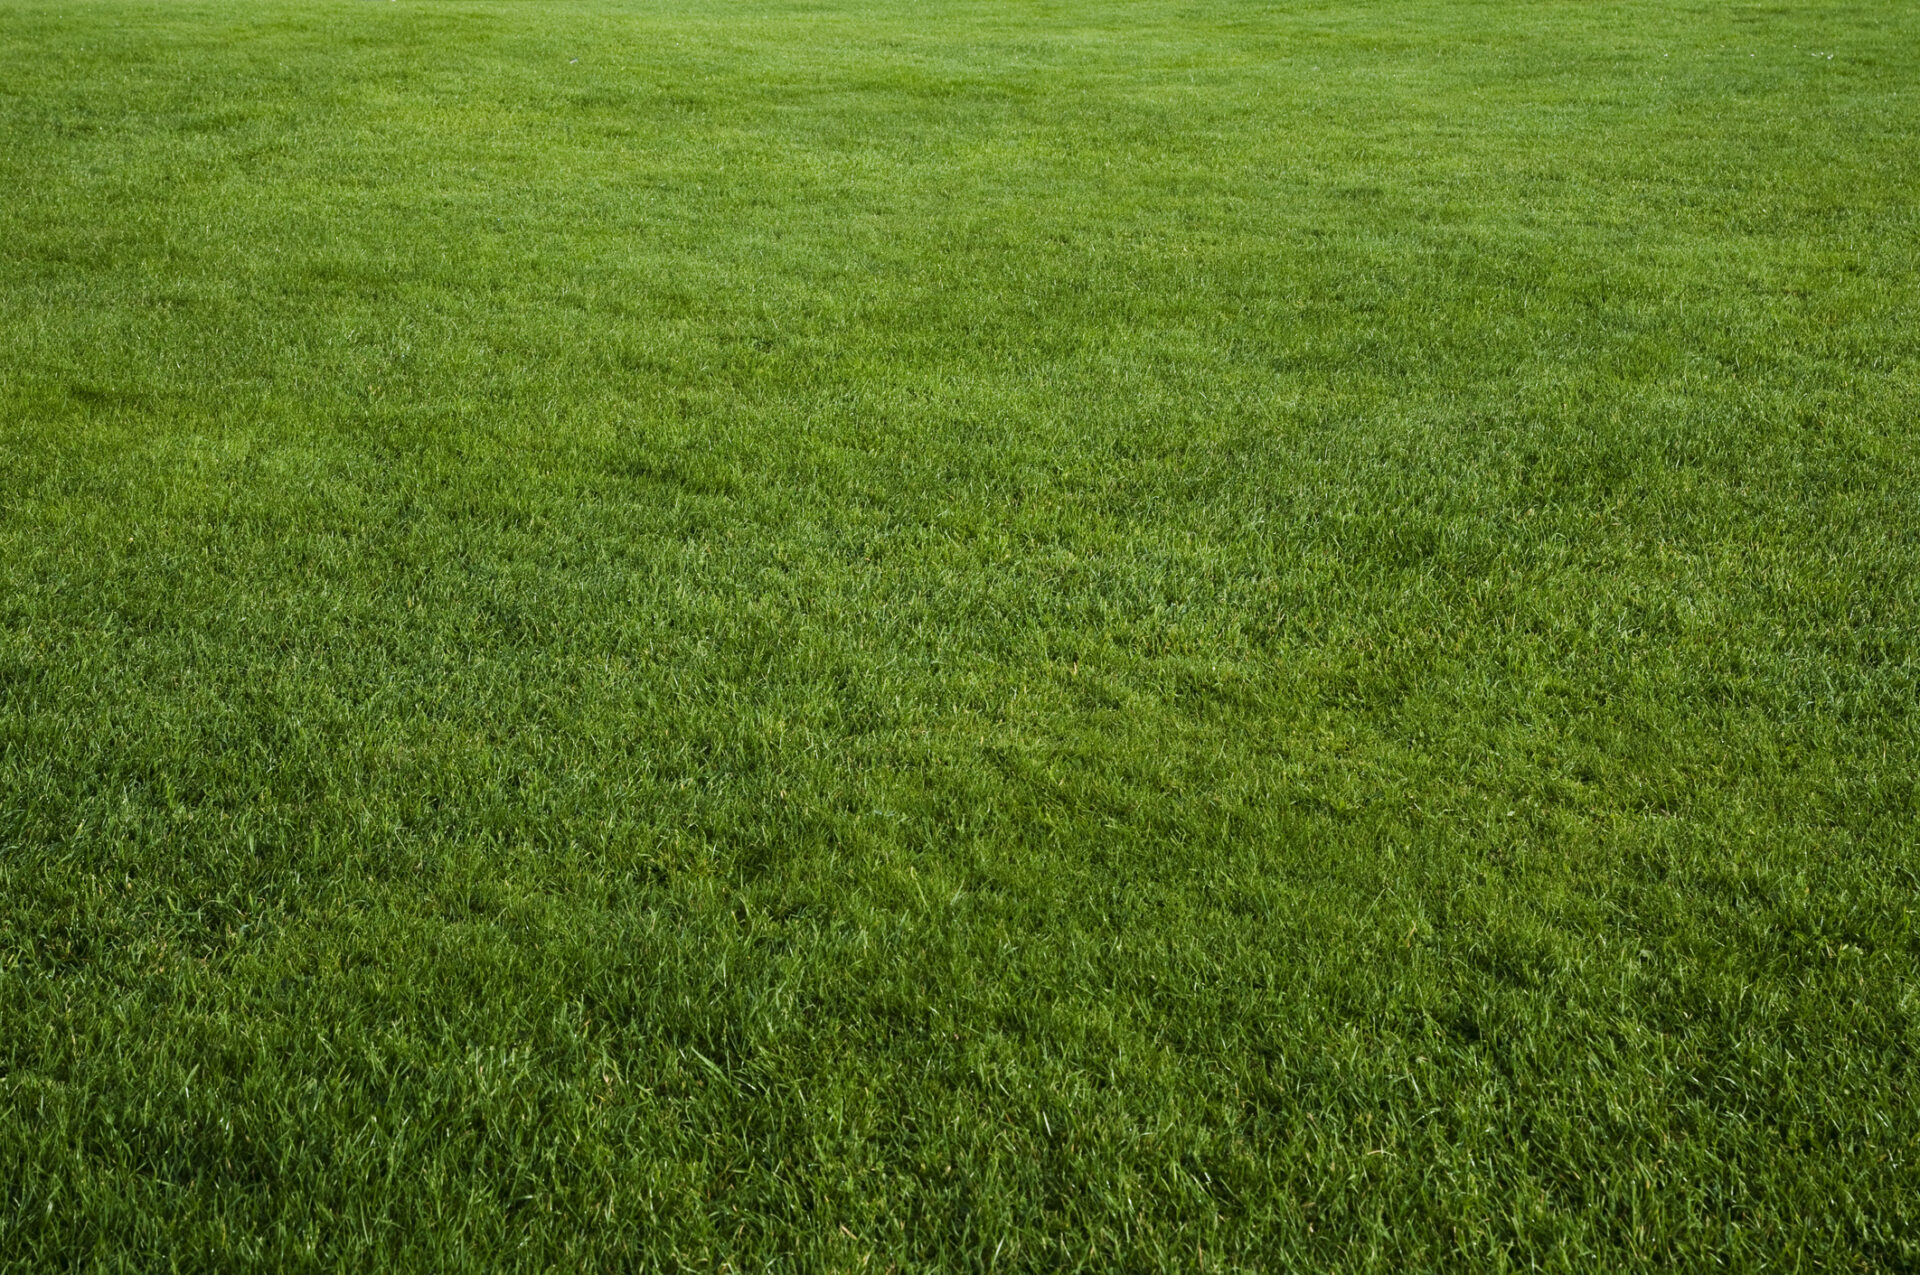 This image shows a vast expanse of lush, green grass covering the ground uniformly, with no visible interruptions or objects in the field.